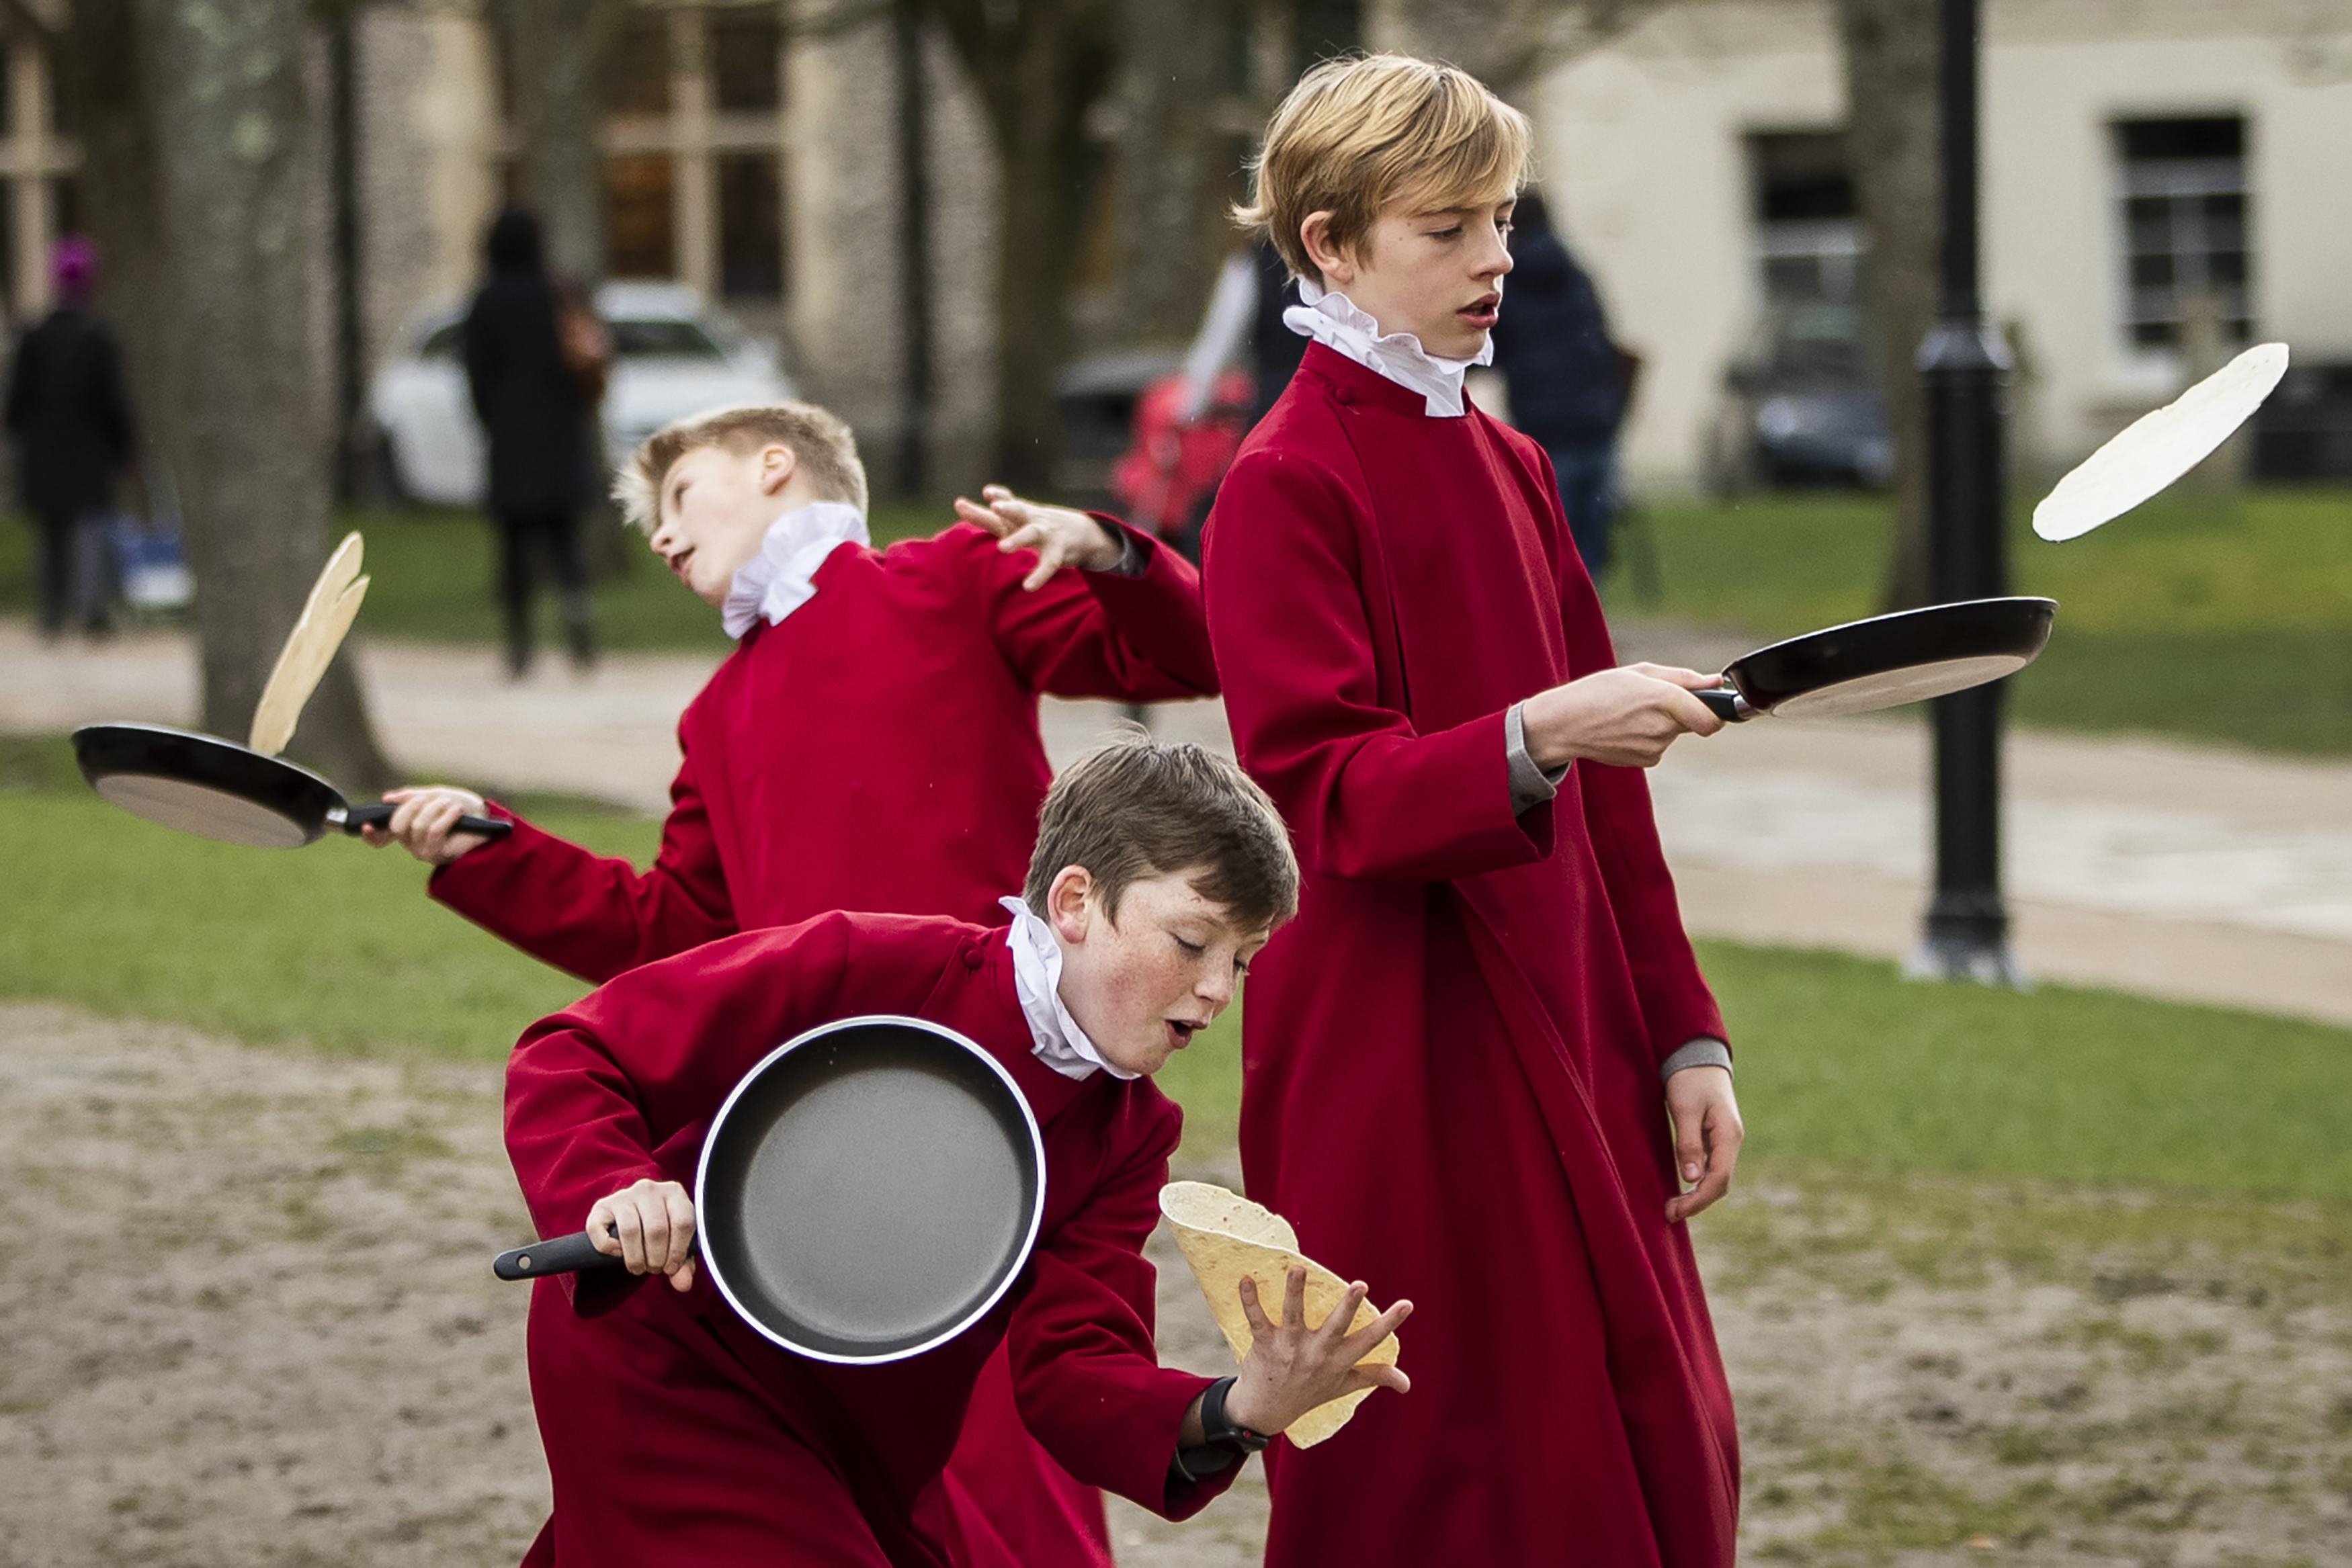 Choristers from Winchester Cathedral joke around in between being posed up for pictures by photographers on March 5, 2019 in Winchester, England. Winchester Cathedral held it's inaugural Shrove Tuesday Pancake day race in the Cathedral grounds today with money raised going to local charities.